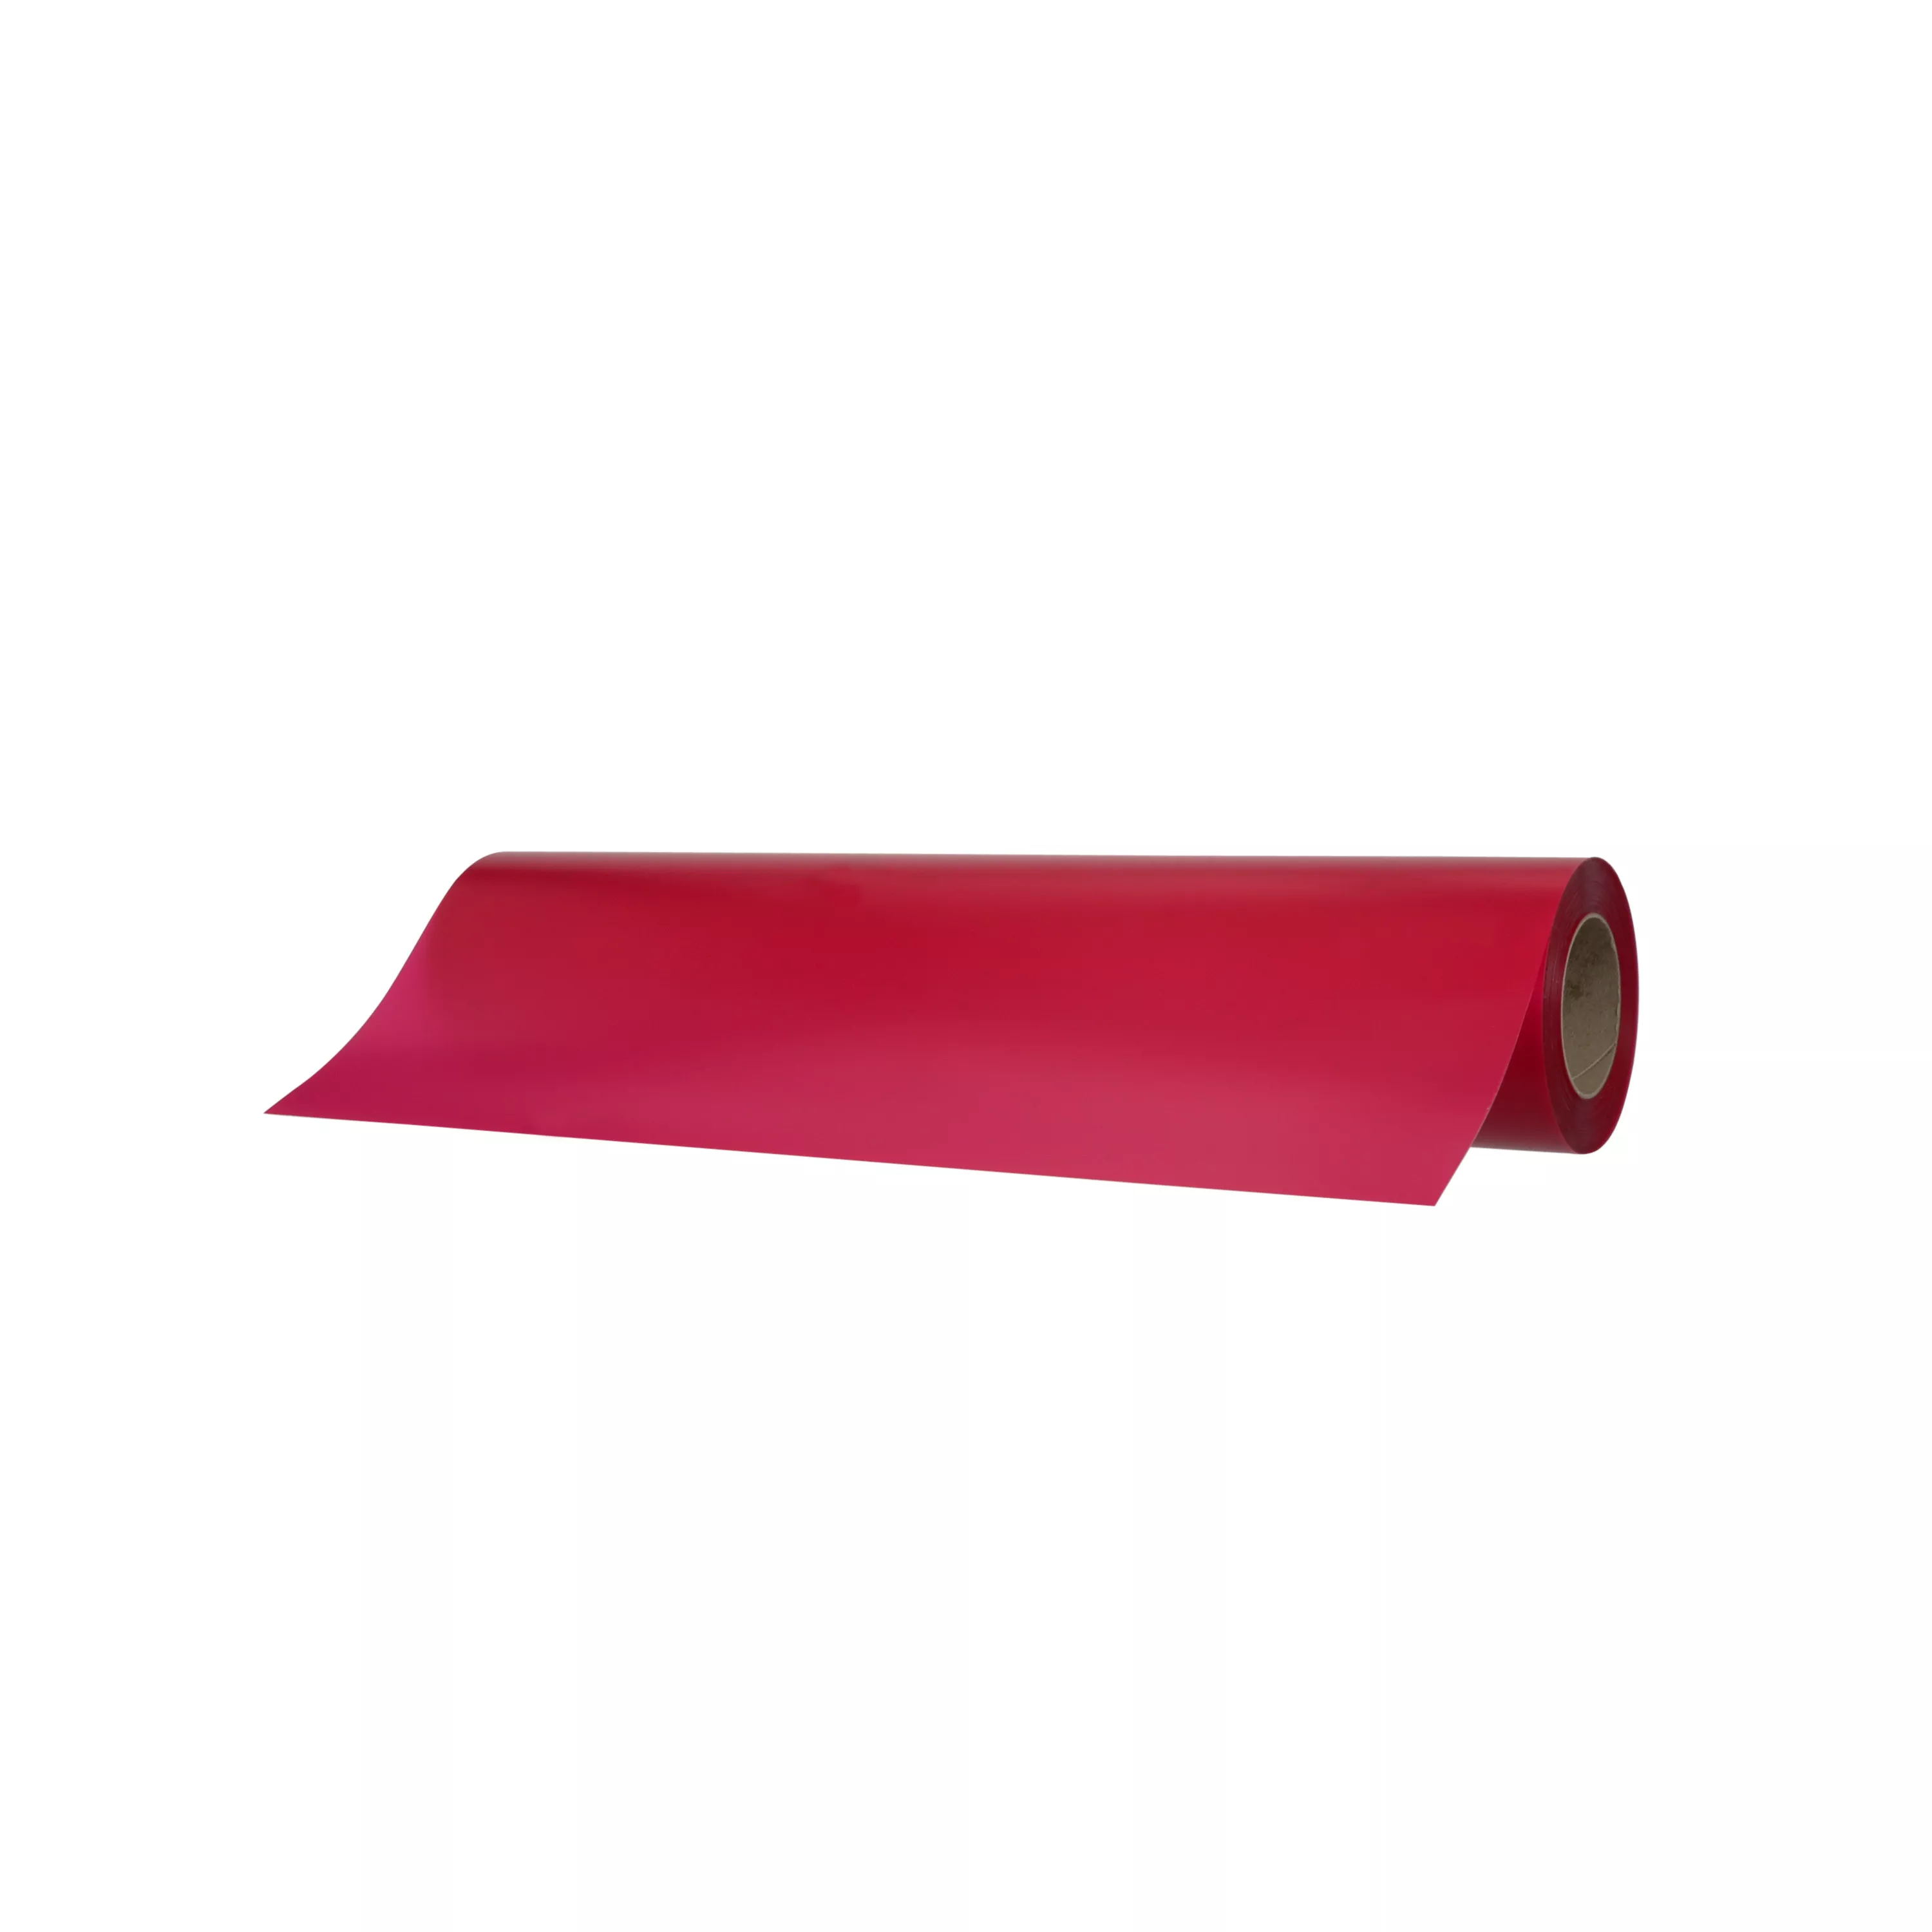 3M™ Scotchcal™ Translucent Graphic Film 3630-98, Electric Pink, 48 in x
50 yd, 1 Roll/Case